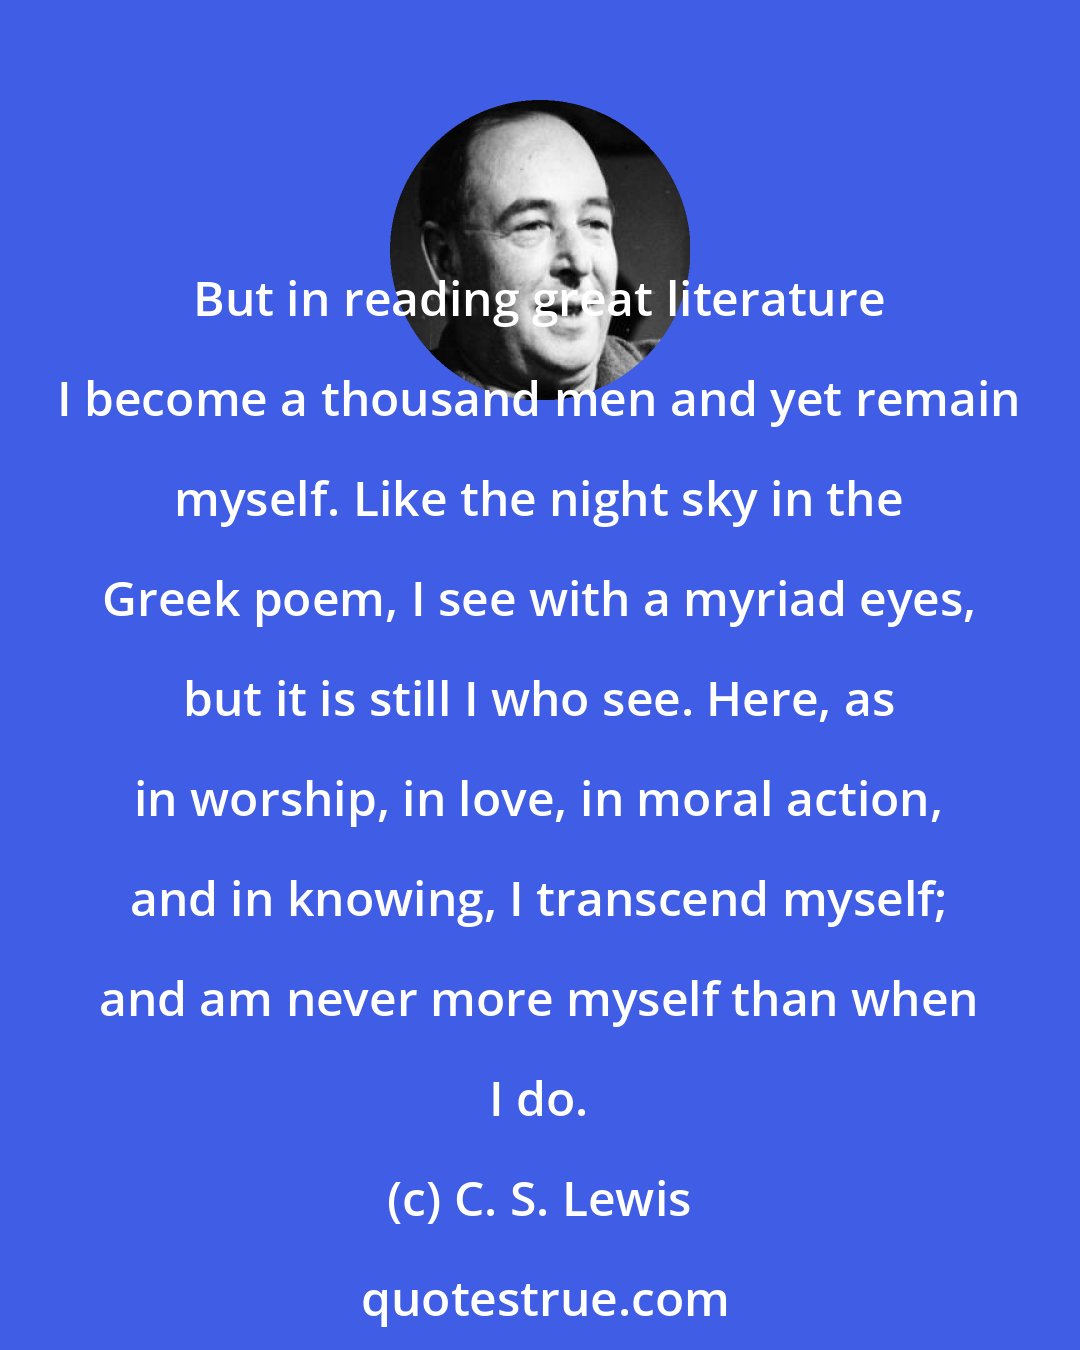 C. S. Lewis: But in reading great literature I become a thousand men and yet remain myself. Like the night sky in the Greek poem, I see with a myriad eyes, but it is still I who see. Here, as in worship, in love, in moral action, and in knowing, I transcend myself; and am never more myself than when I do.